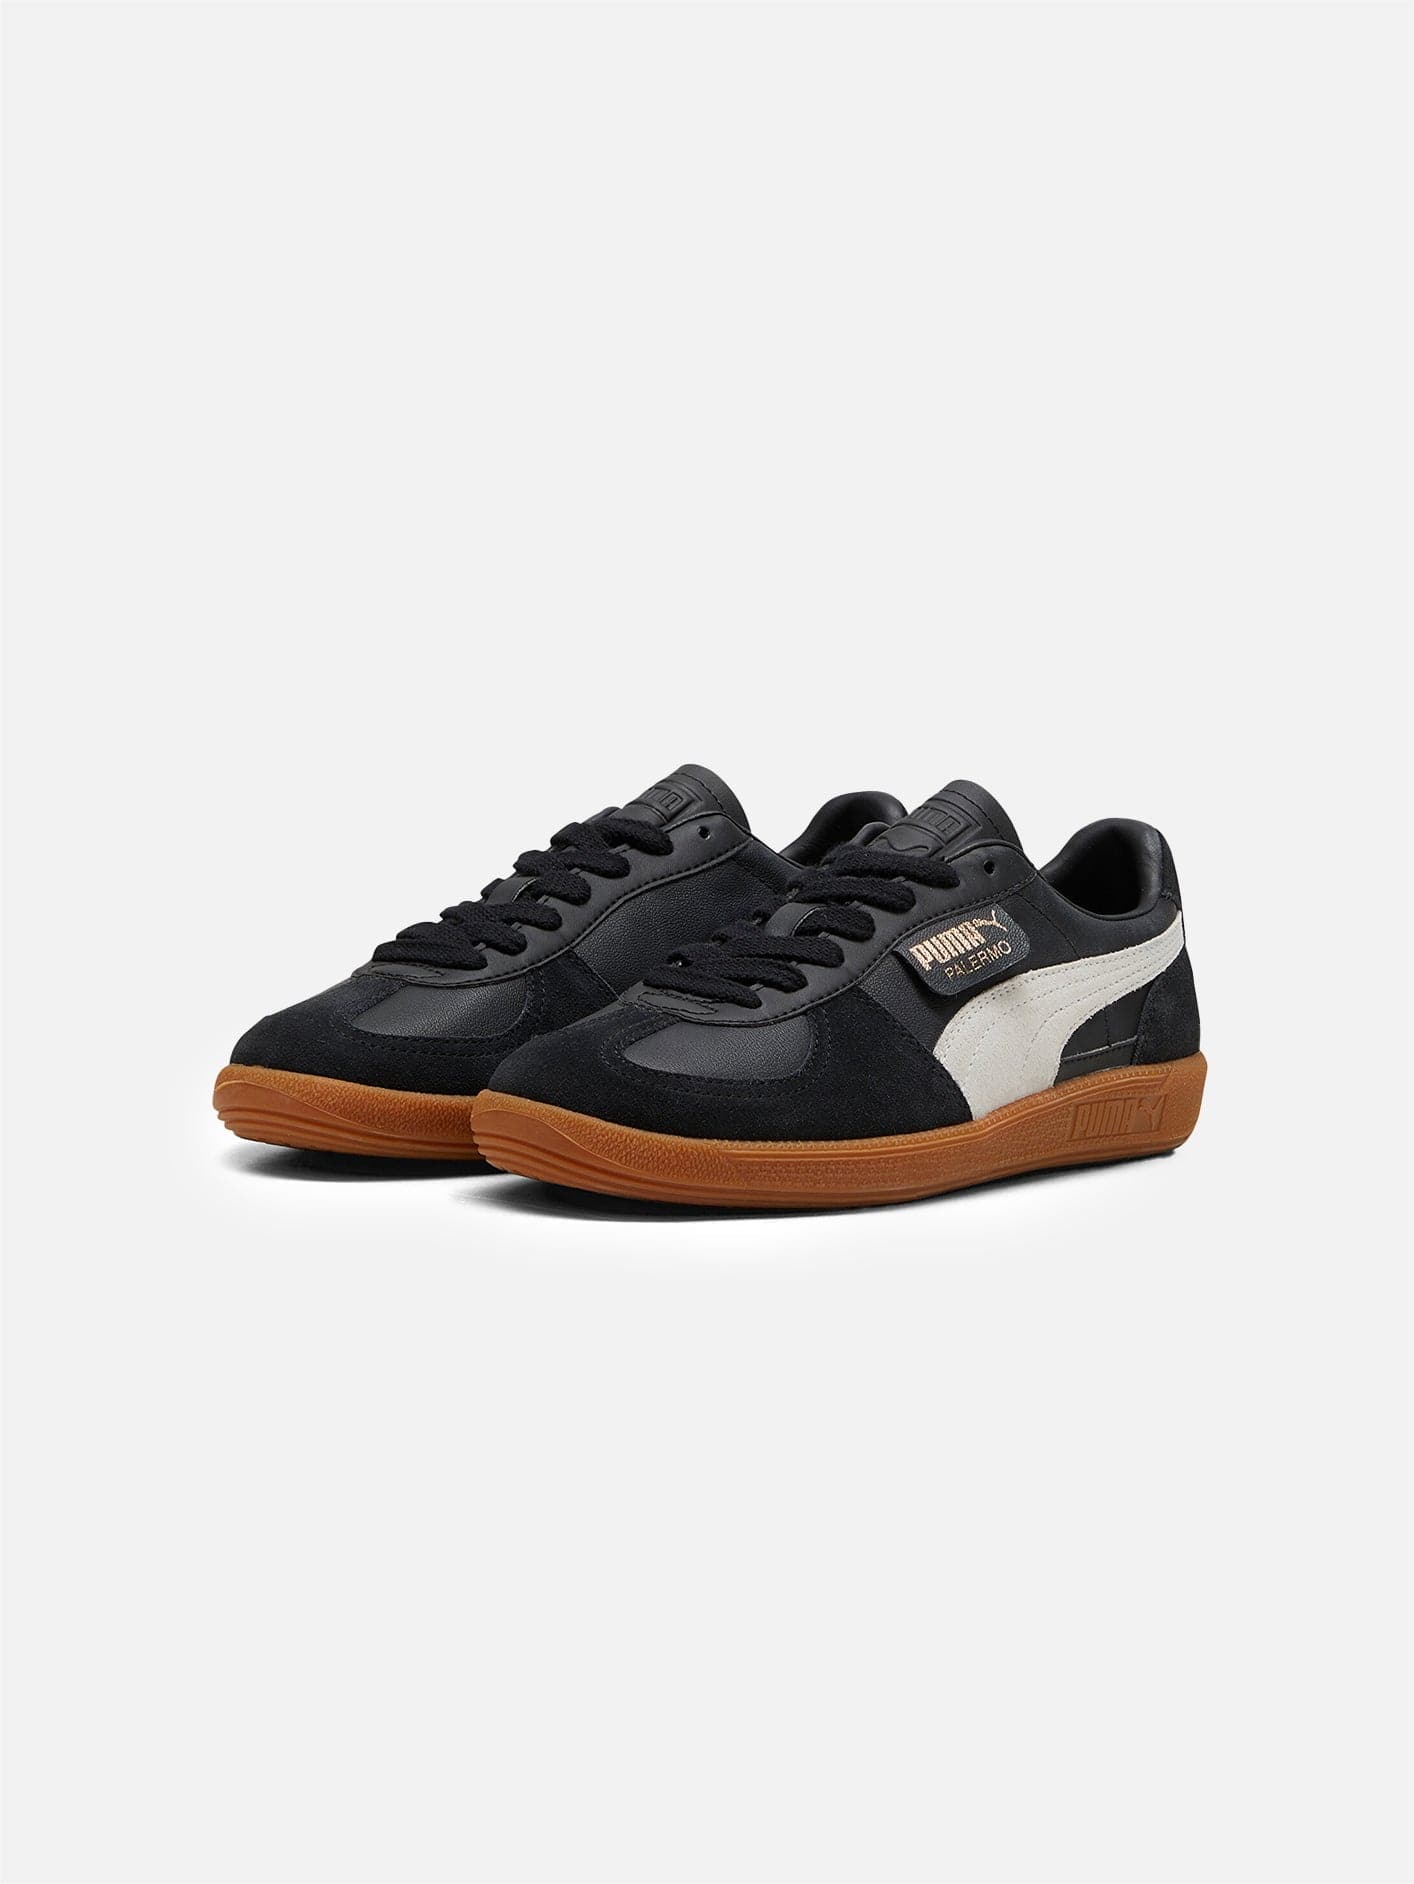 Palermo Leather Men's Sneakers